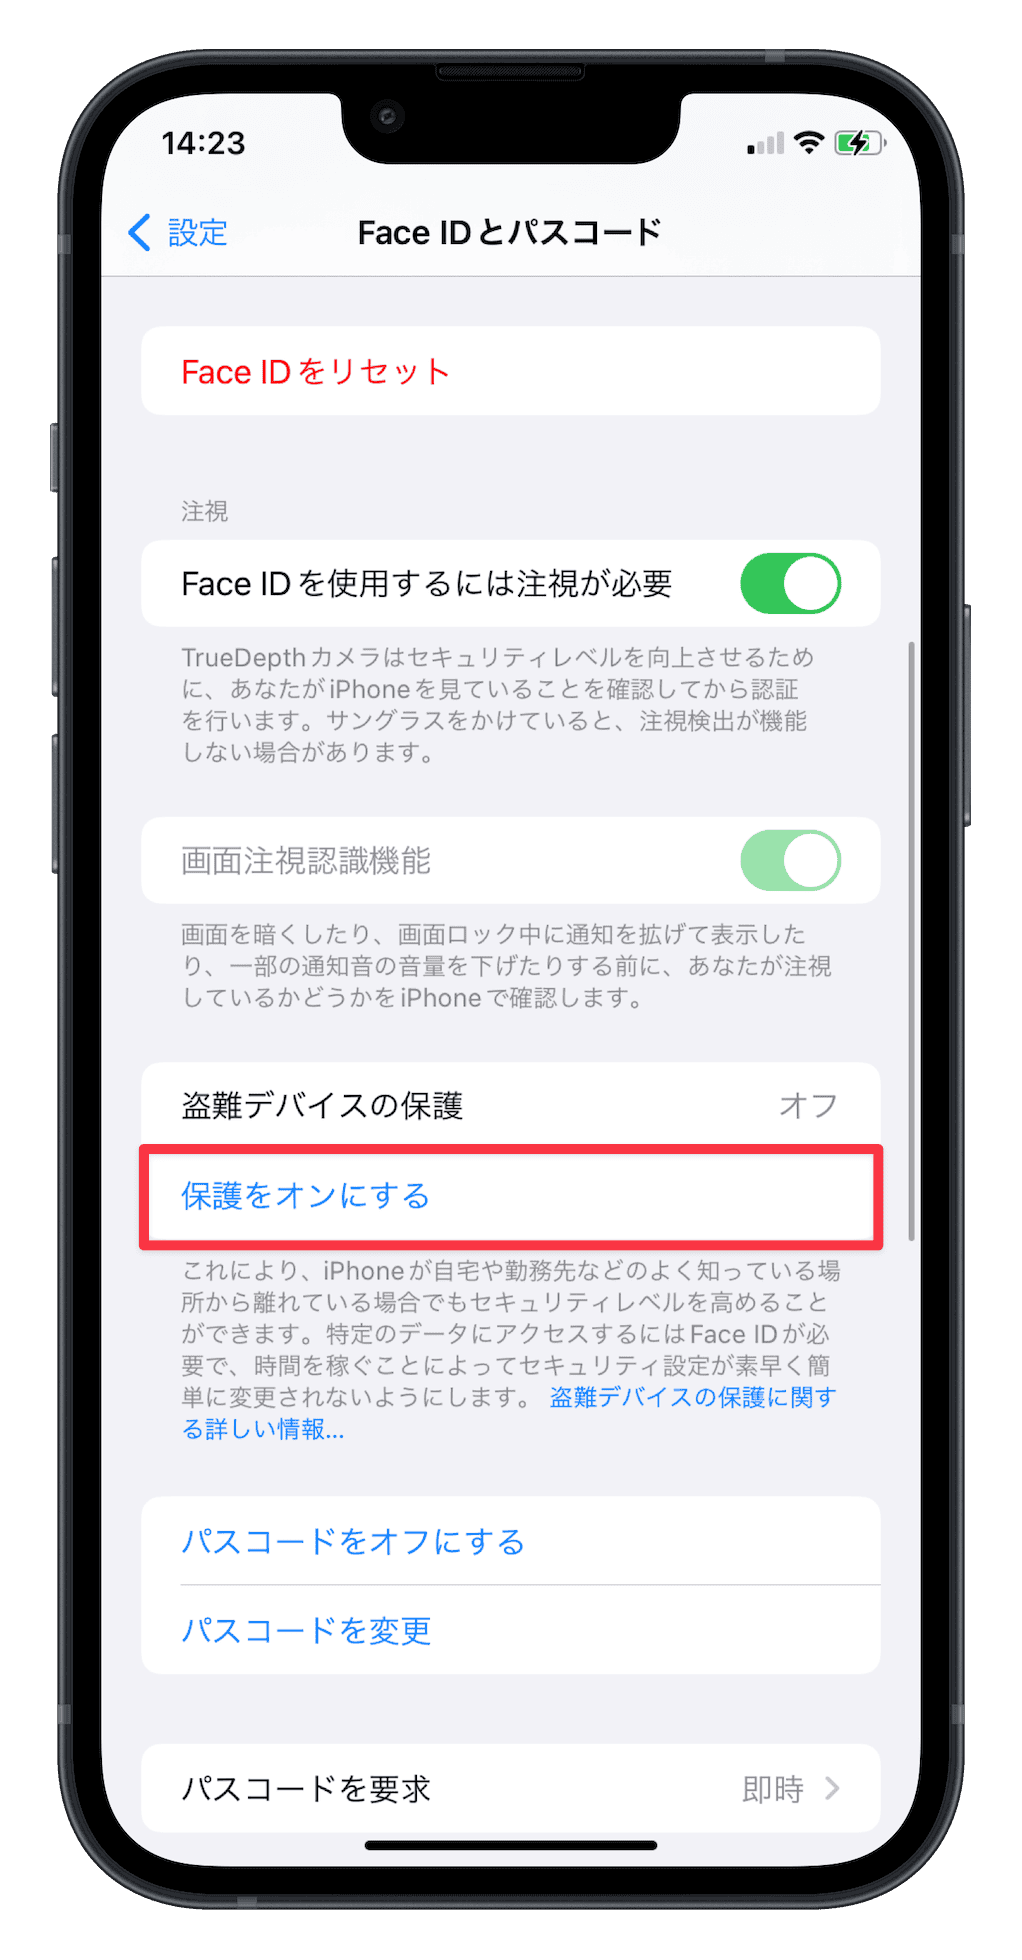 turn-on-stolen-device-protection-iphone-jp.png